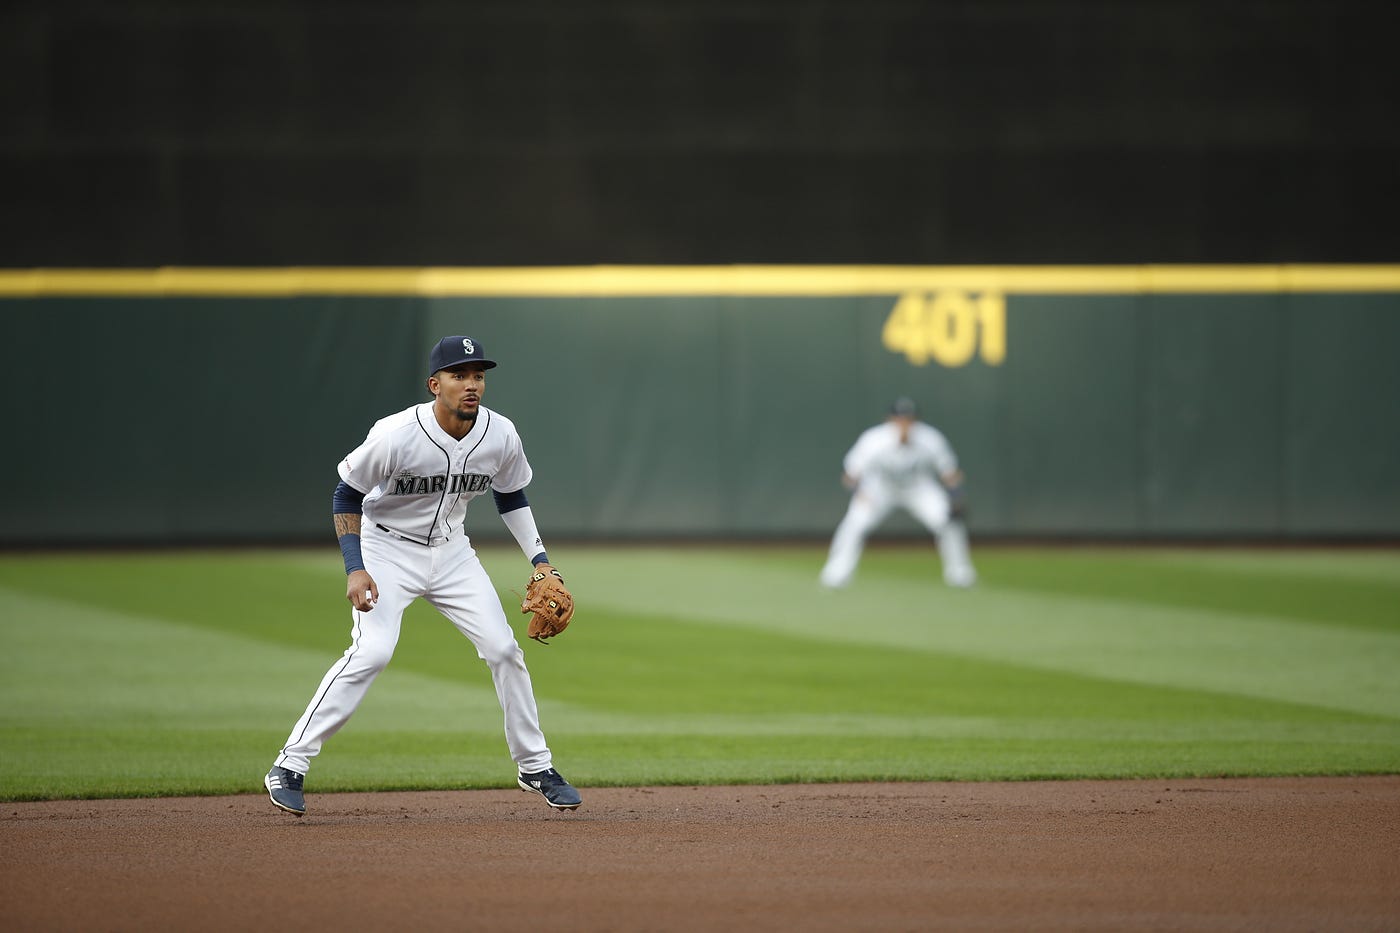 Mariners stood with JP Crawford. He's making them look pretty